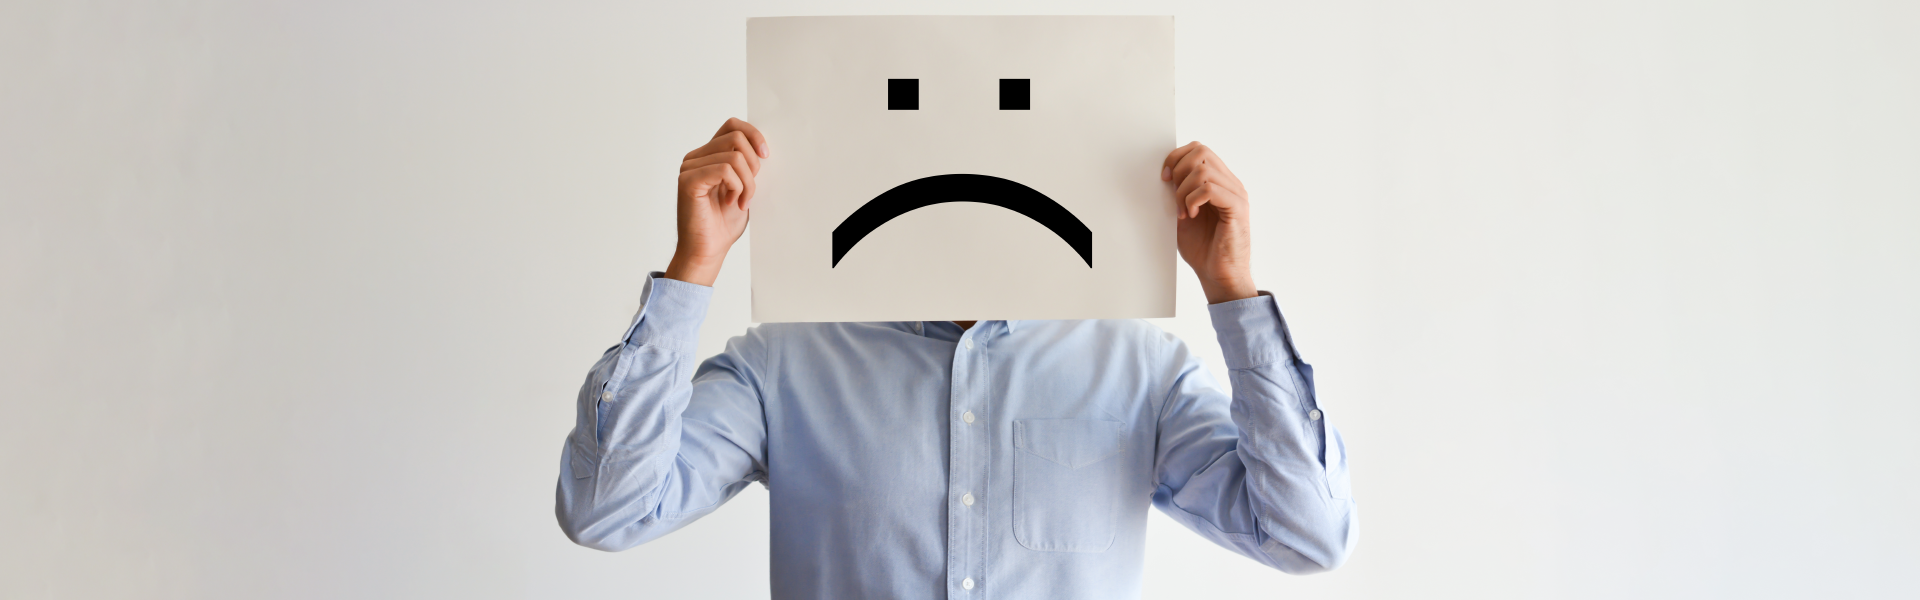 7 Reasons You Are Unhappy With Your Job & What to Do About It